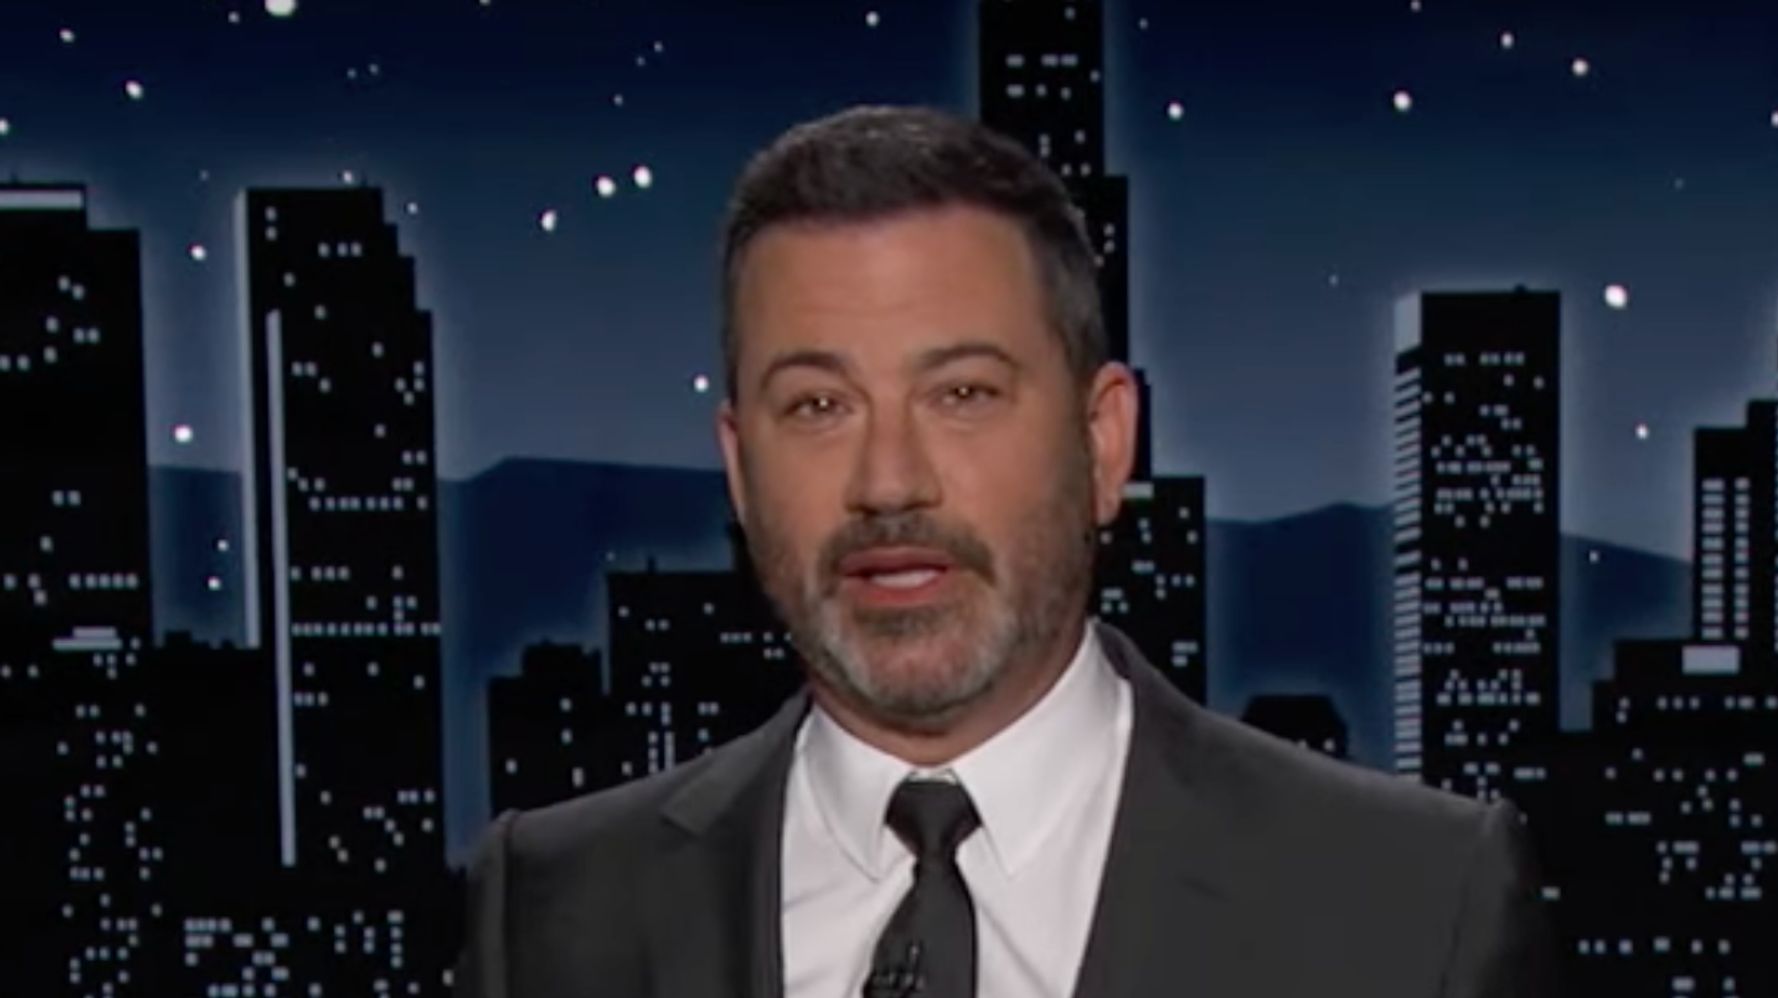 Jimmy Kimmel Debuts Crispy New Hairstyle After Thanksgiving Oven Mishap - HuffPost